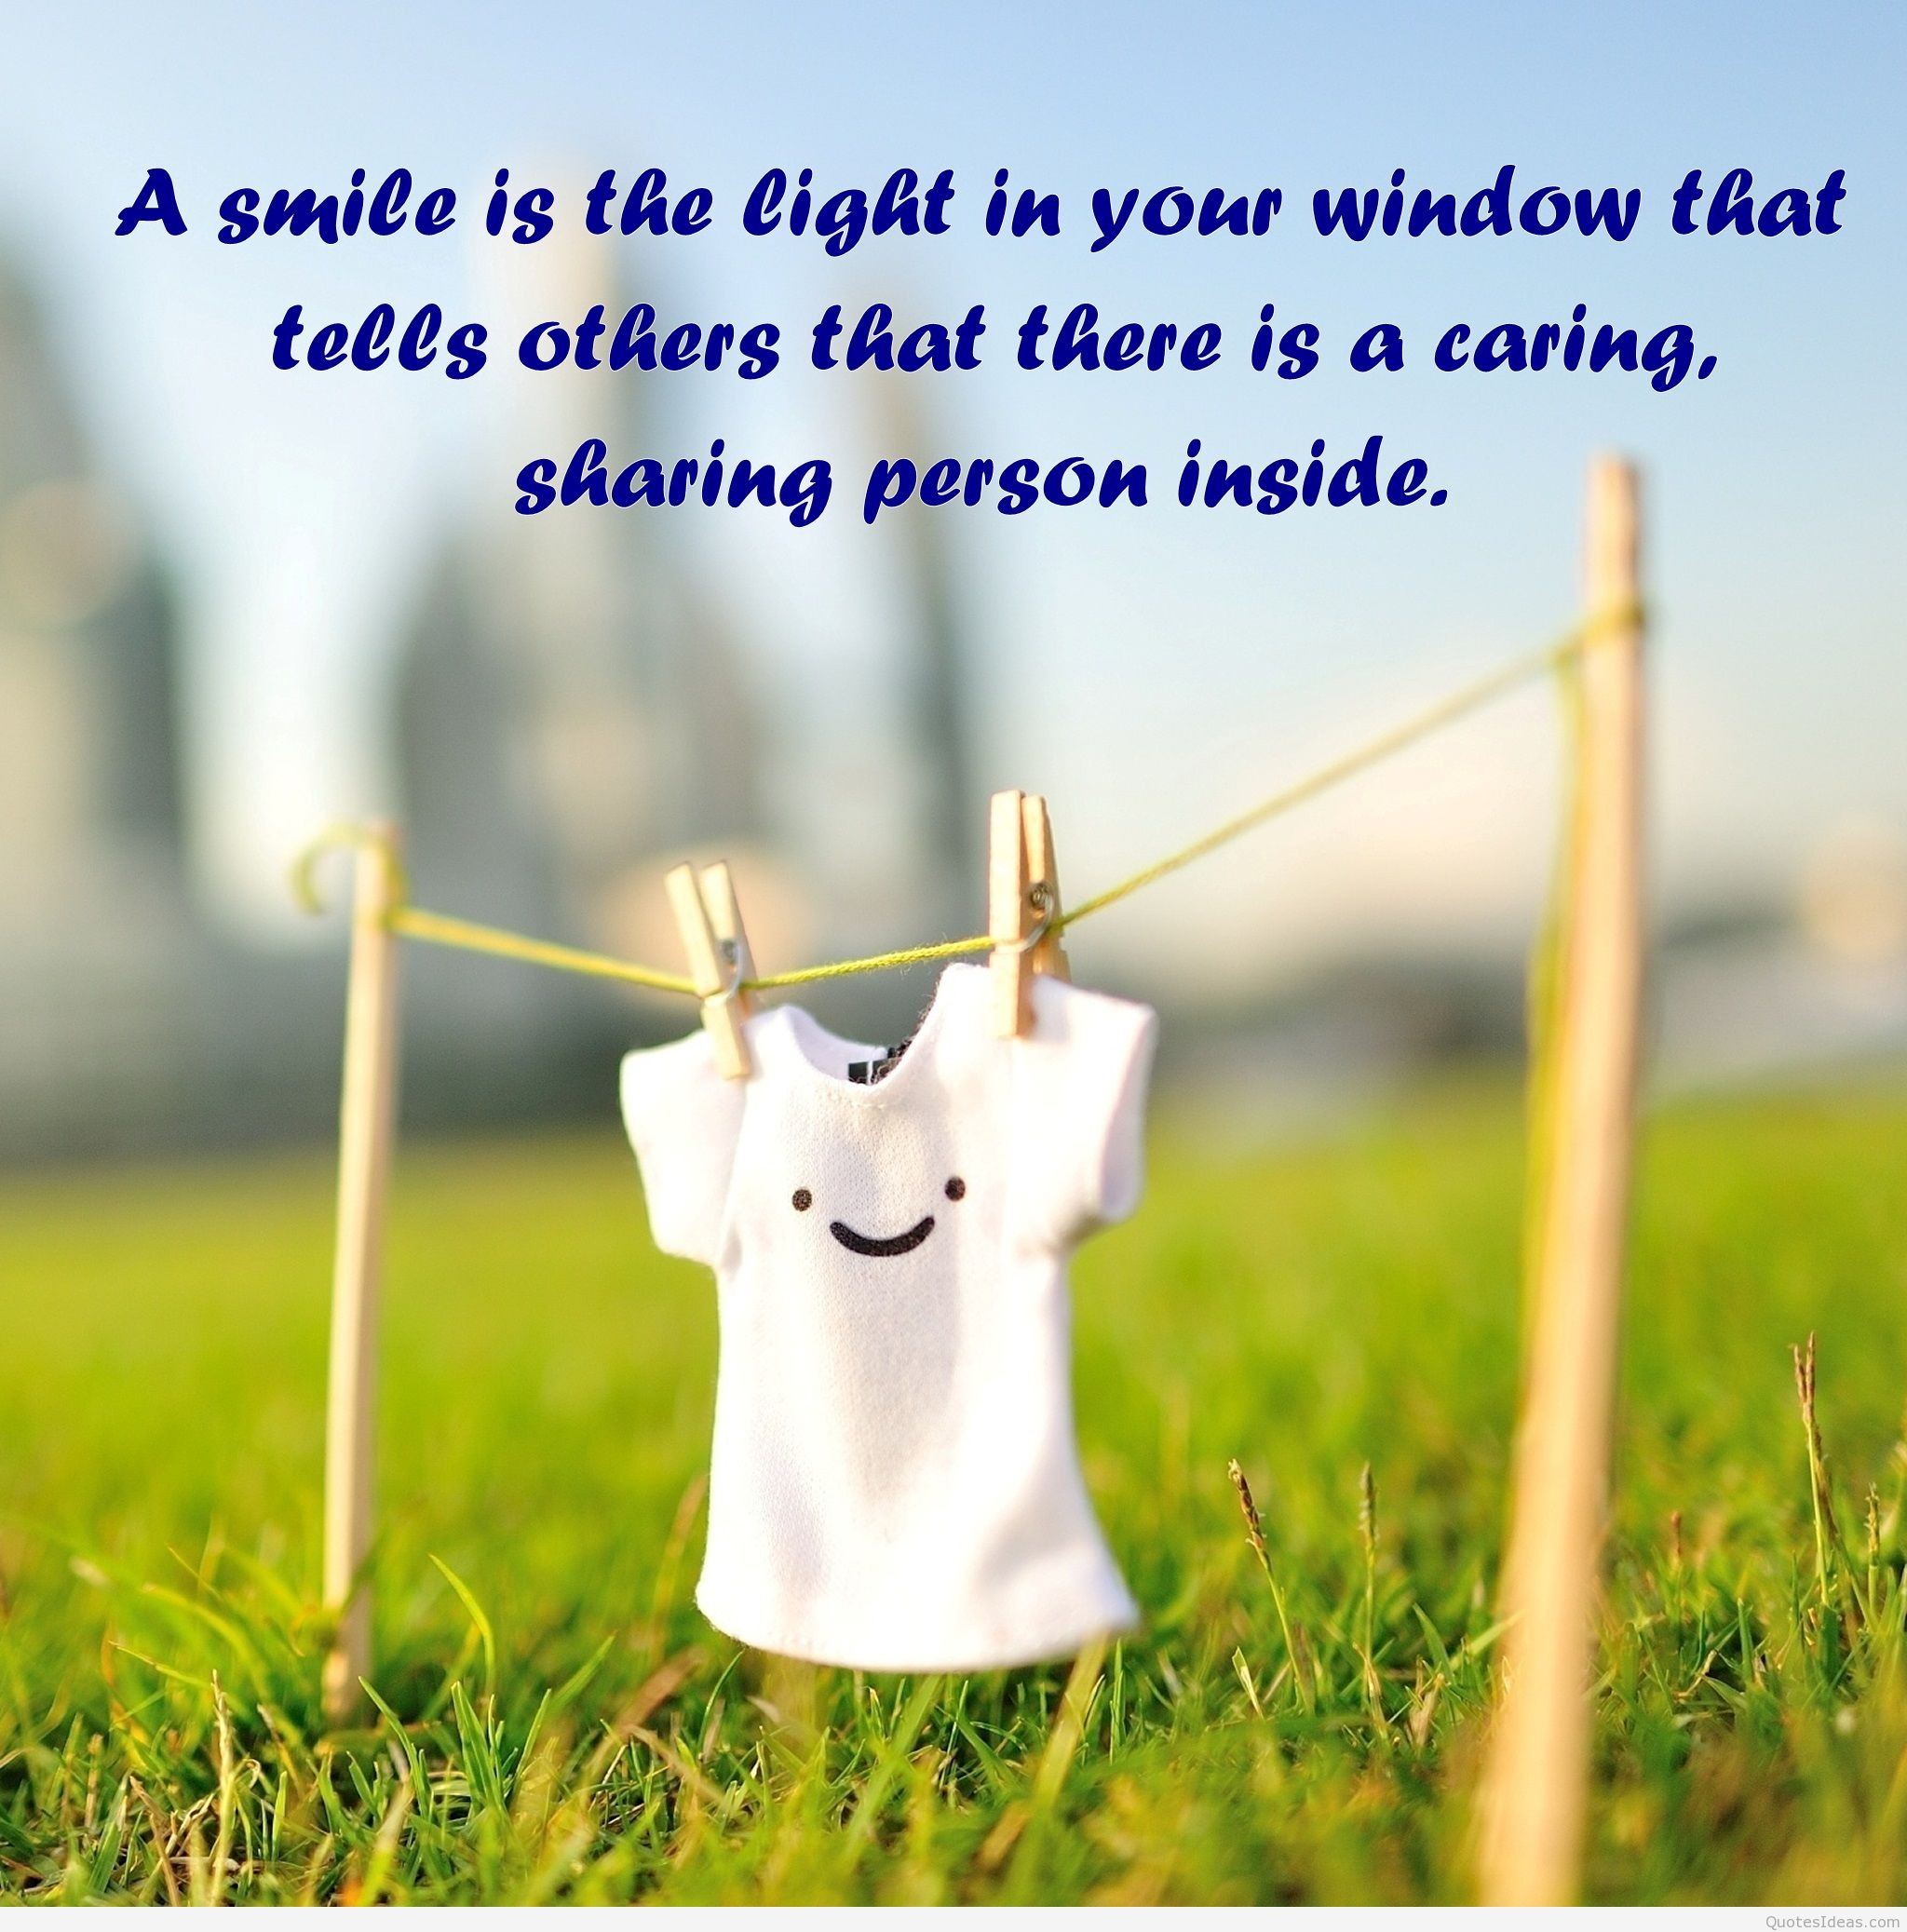 Quote On Smile And Happiness Quotes Wallpaper Image Be